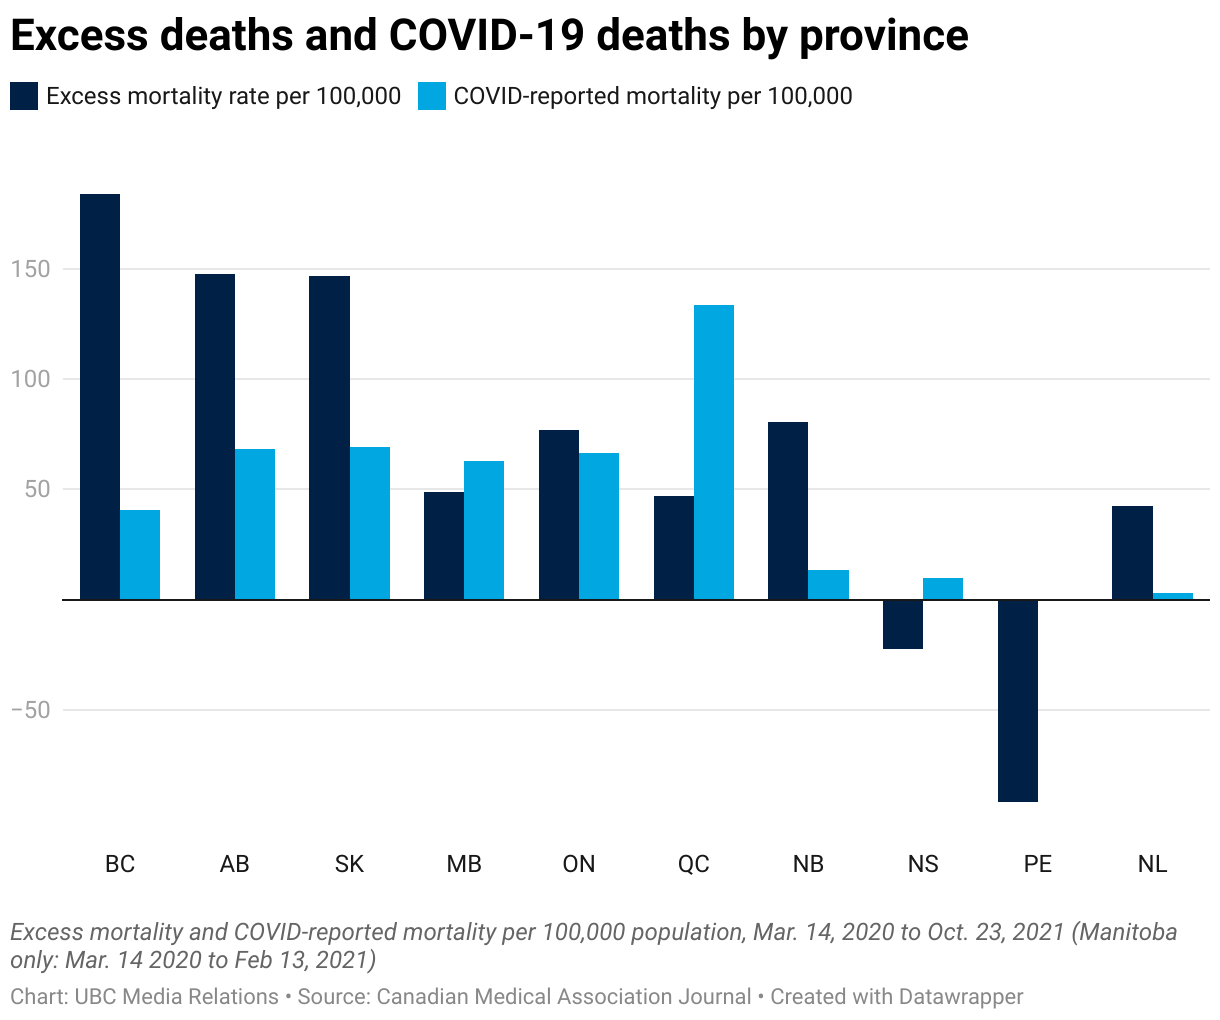 This bar graph shows that excess deaths were much higher in western provinces than anywhere else in Canada. Quebec had a higher number of deaths from COVID-19 than the (smaller) western provinces, but its excess deaths were about half. Nova Scotia and PEI had negative excess deaths. From the graph it appears that PEI had no deaths from COVID-19 at all.